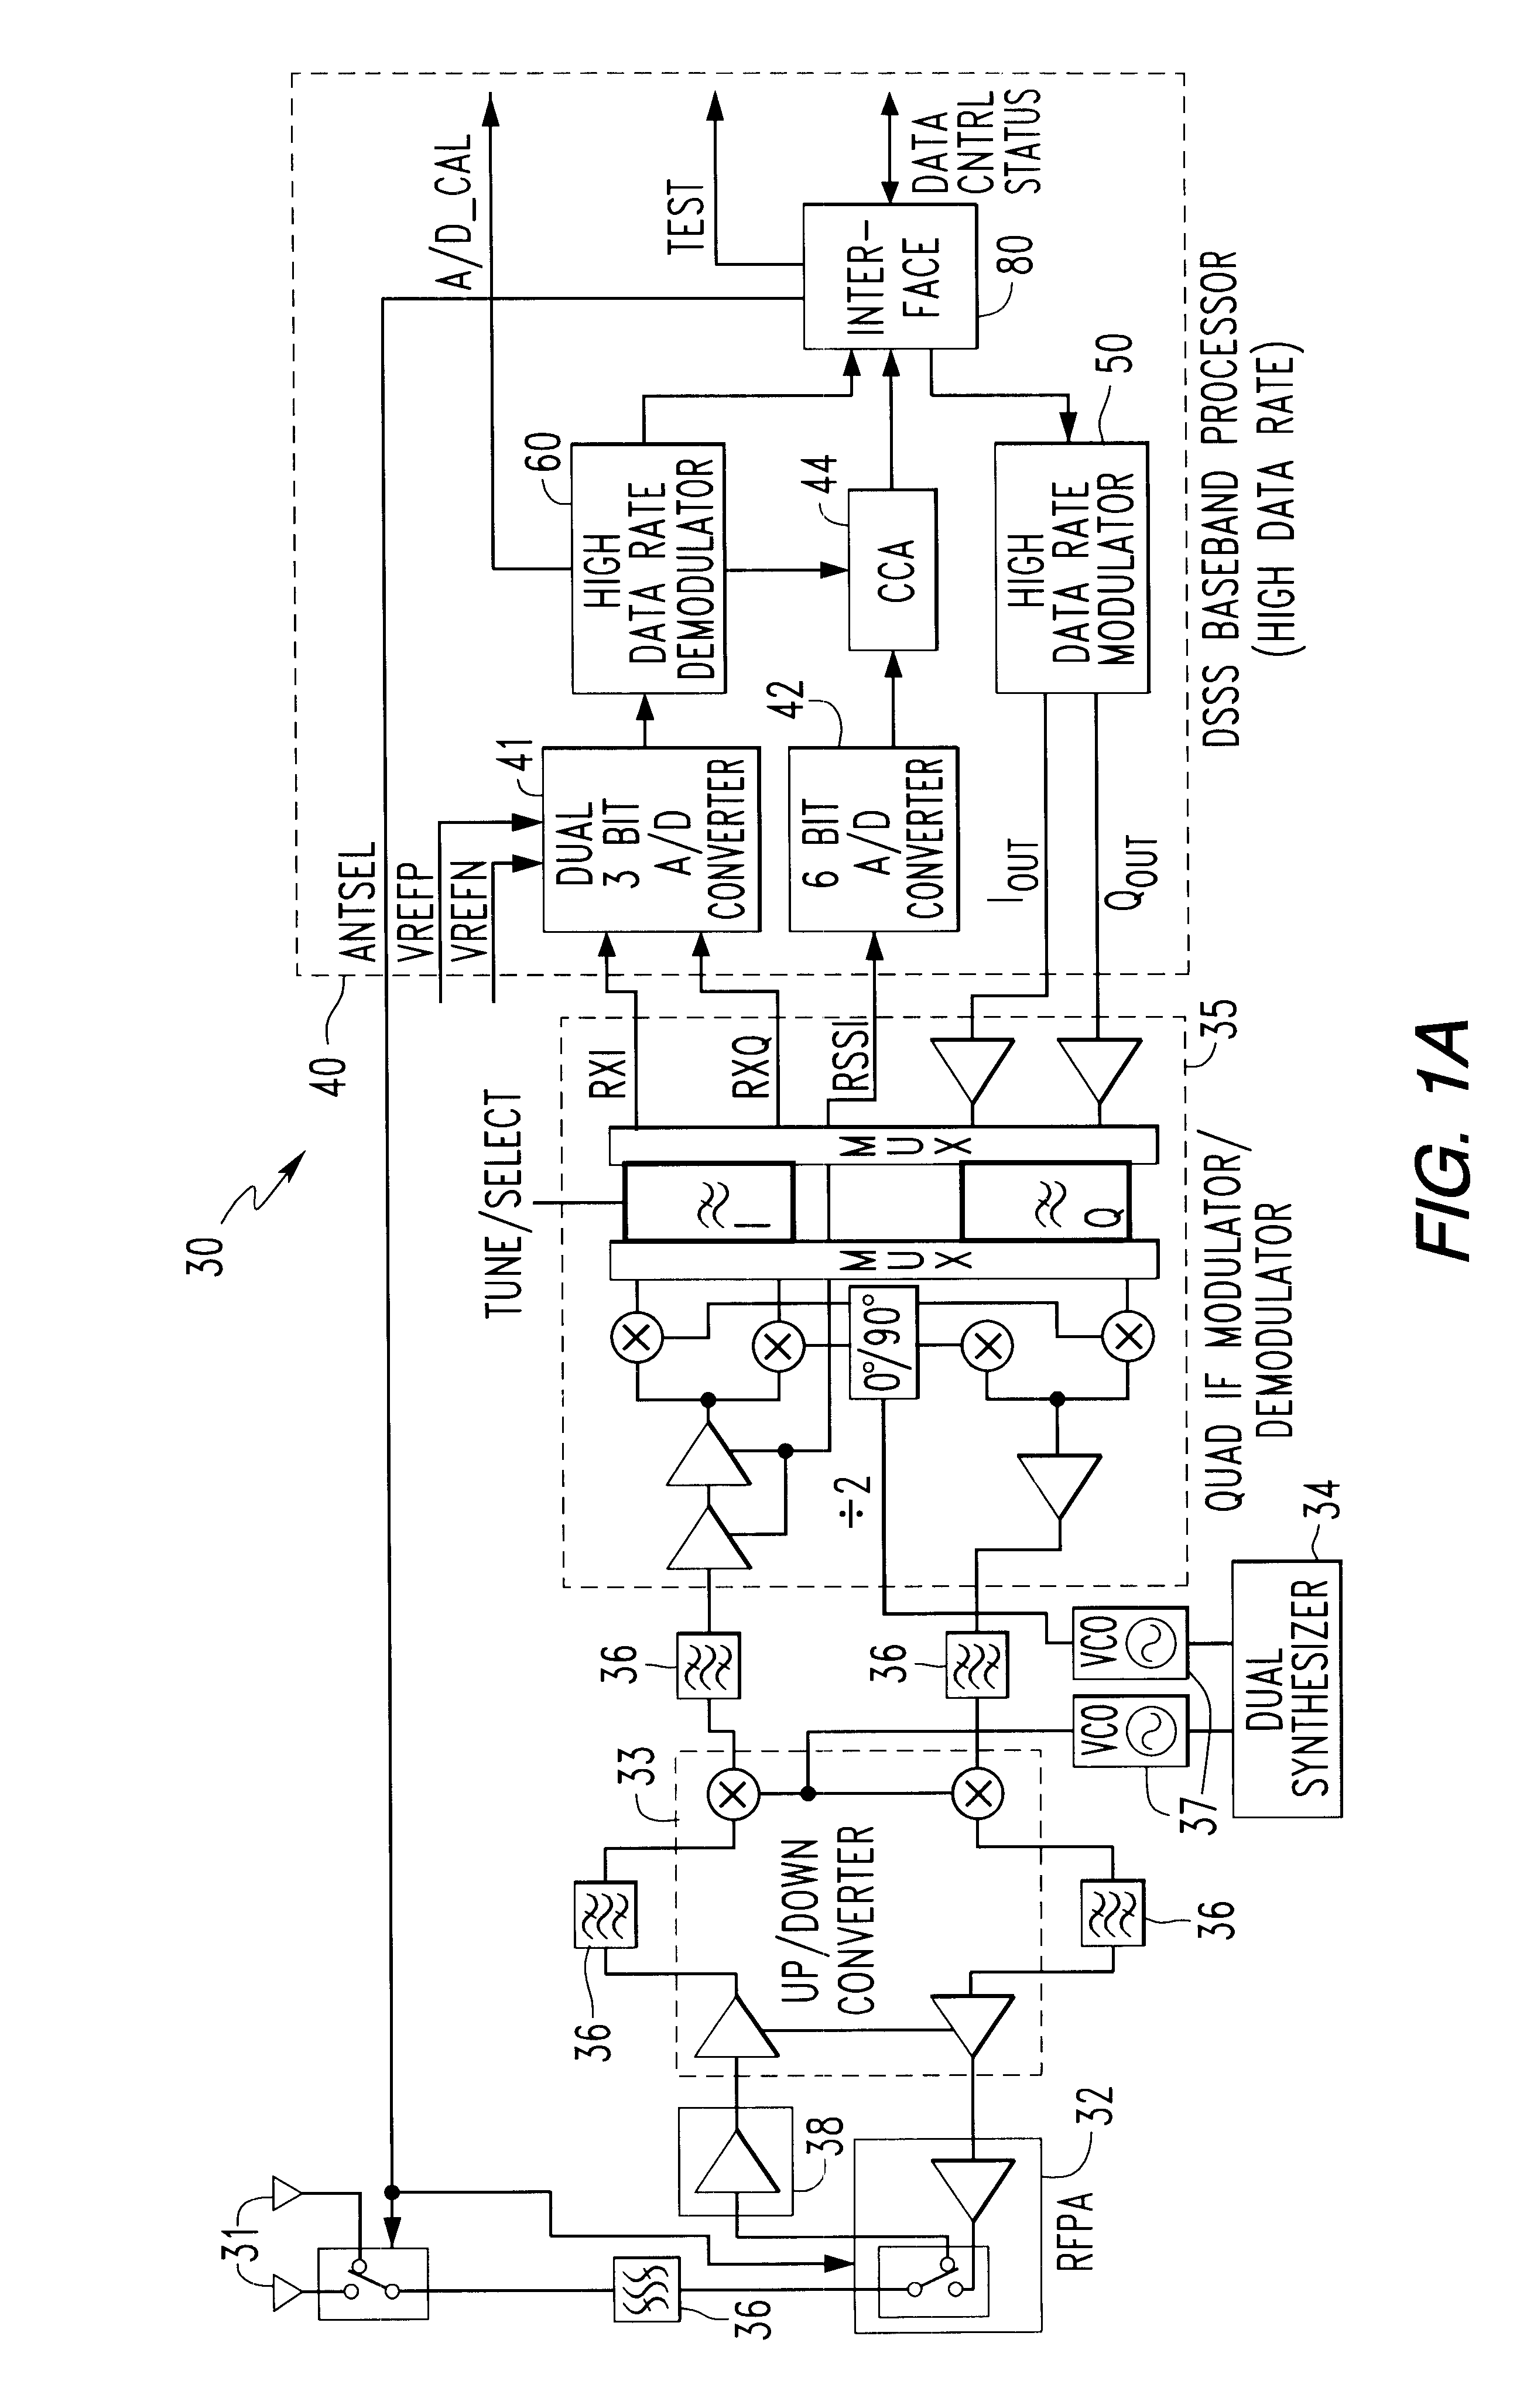 Method of performing antenna diversity in spread spectrum in wireless local area network